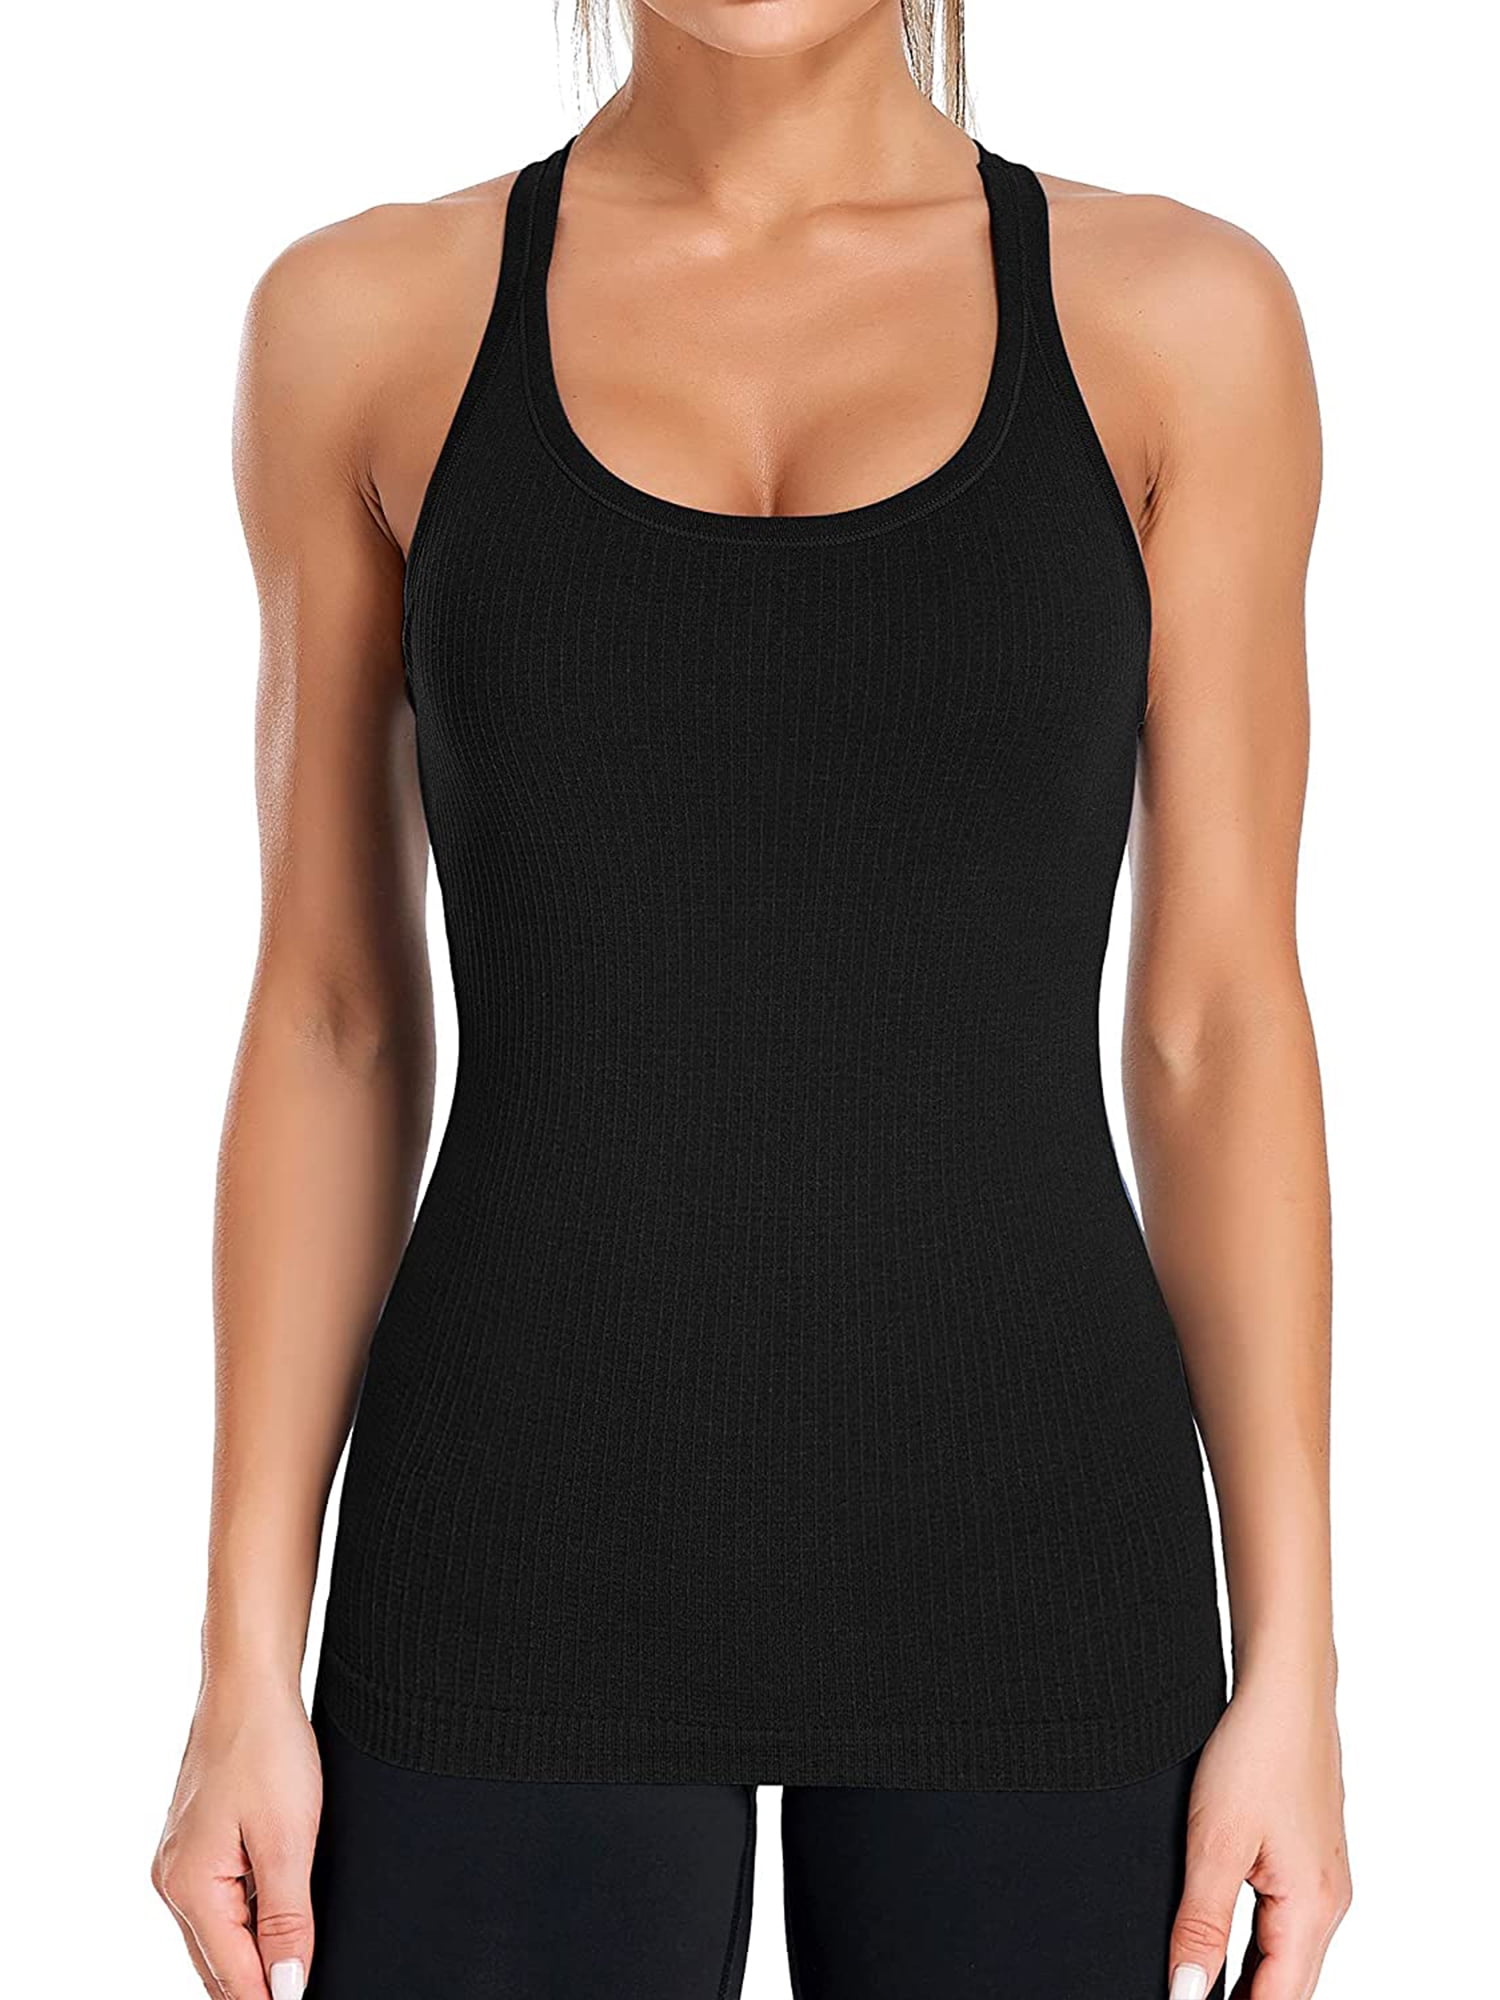 .com .com: RUNNING GIRL Yoga Tank Tops for Women Built in Shelf  Bra B/C Cups Strappy Back Activewear Workout Compression Tops (BX2366  Black.CN:M,US:S) : Clothing, Shoes & Jewelry